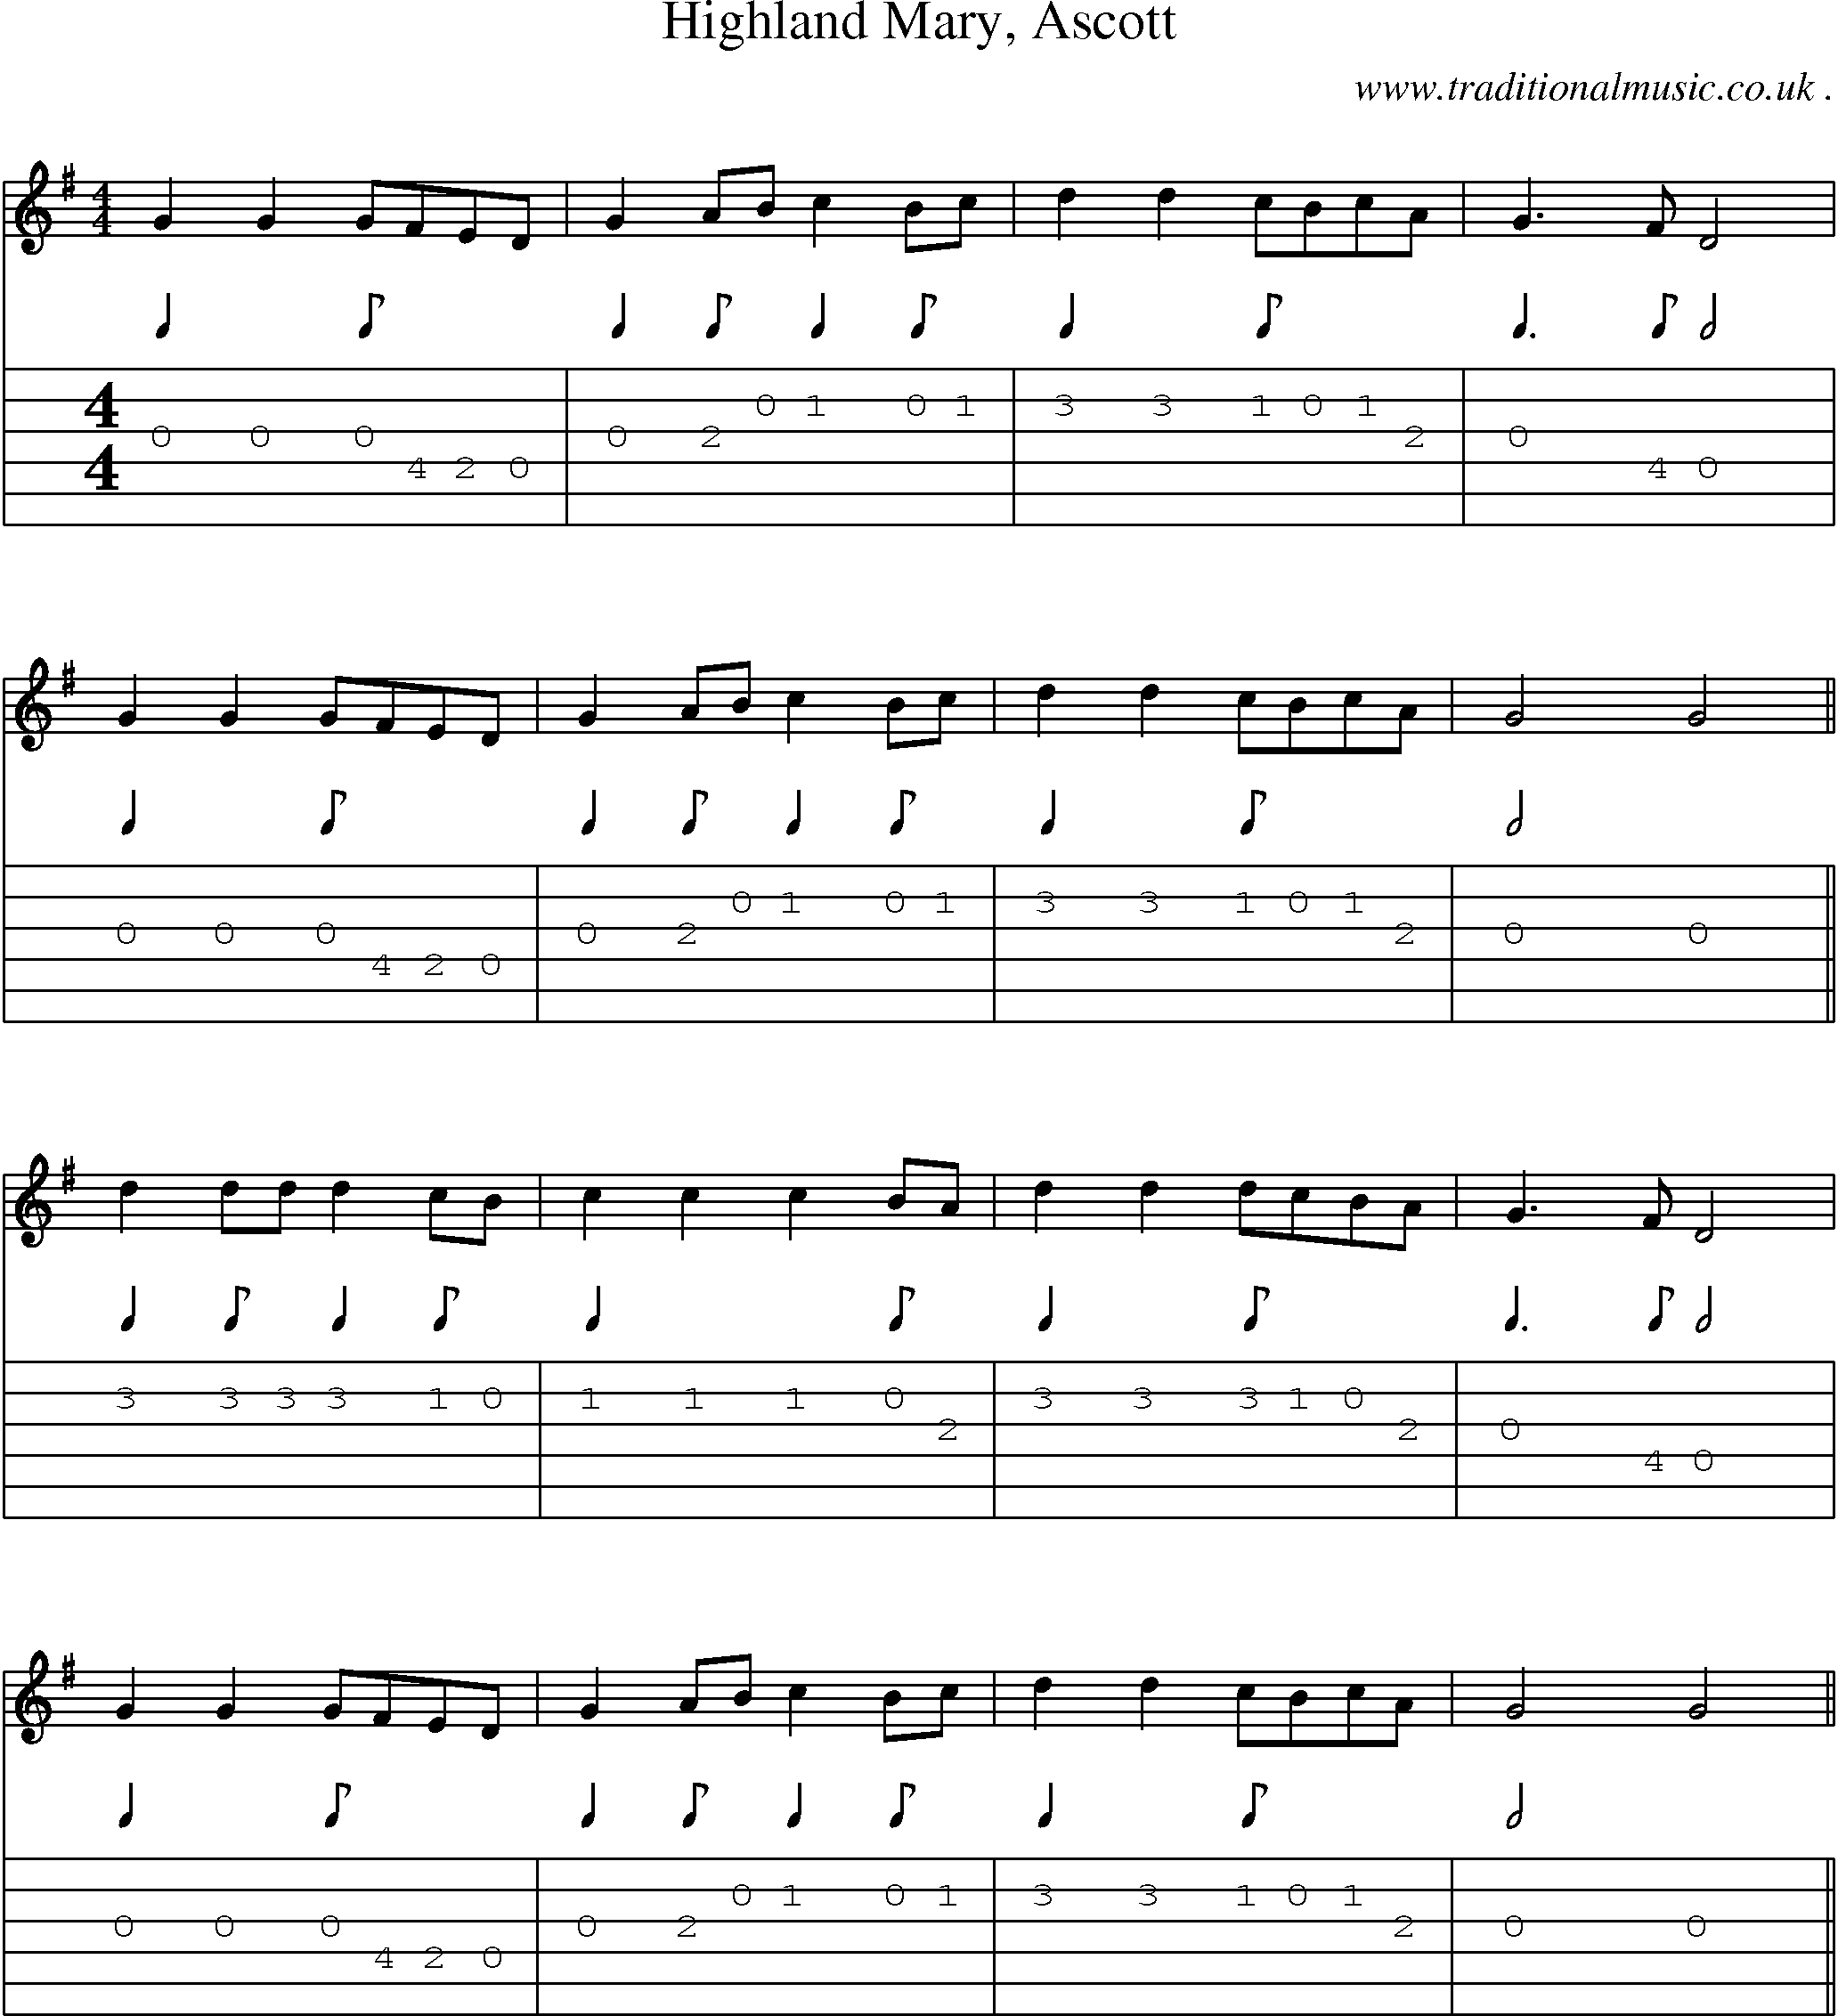 Sheet-Music and Guitar Tabs for Highland Mary Ascott